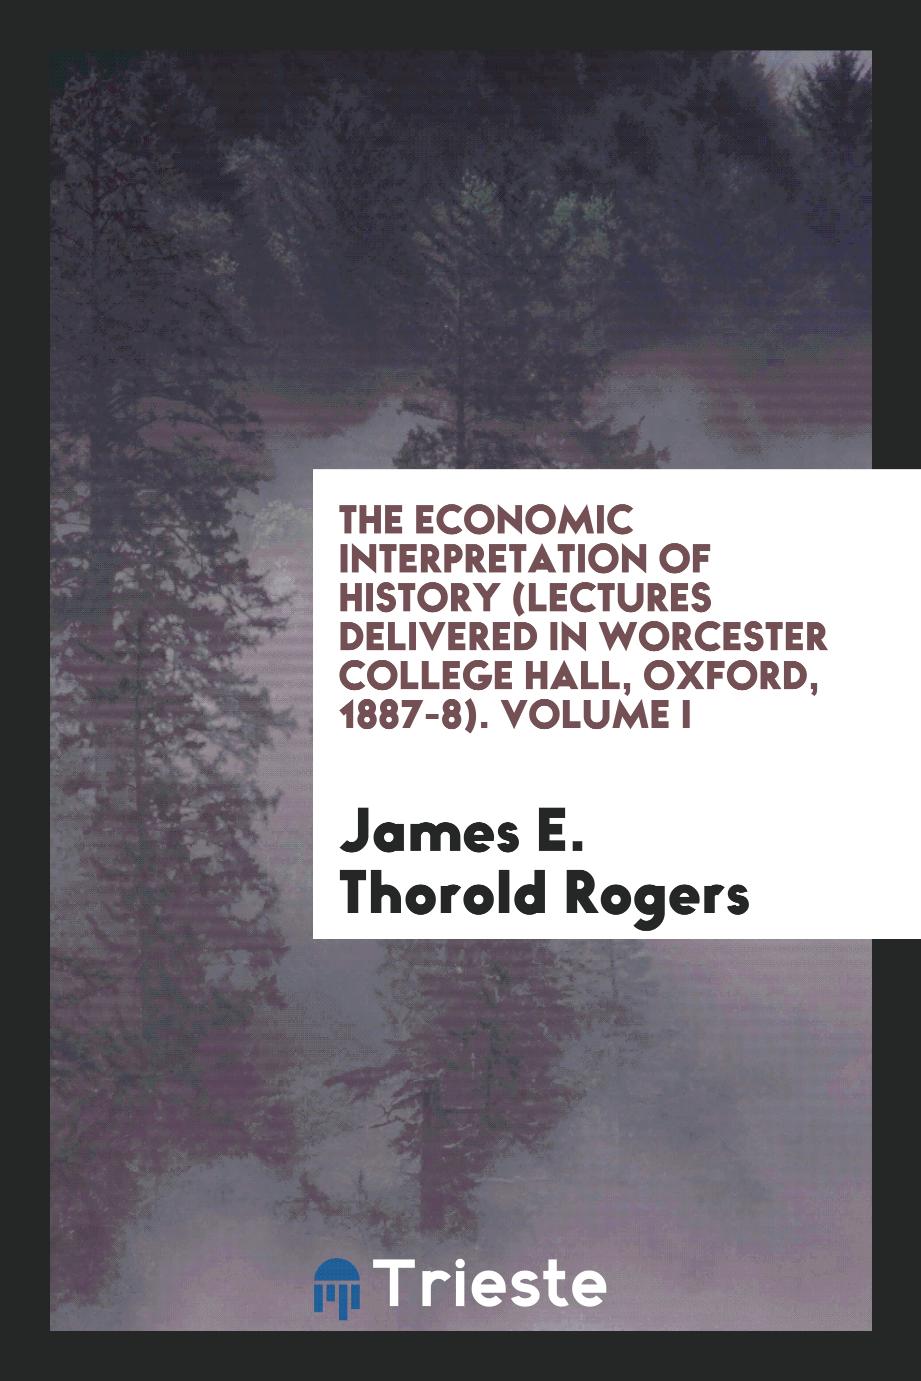 The economic interpretation of history (Lectures delivered in Worcester College Hall, Oxford, 1887-8). Volume I